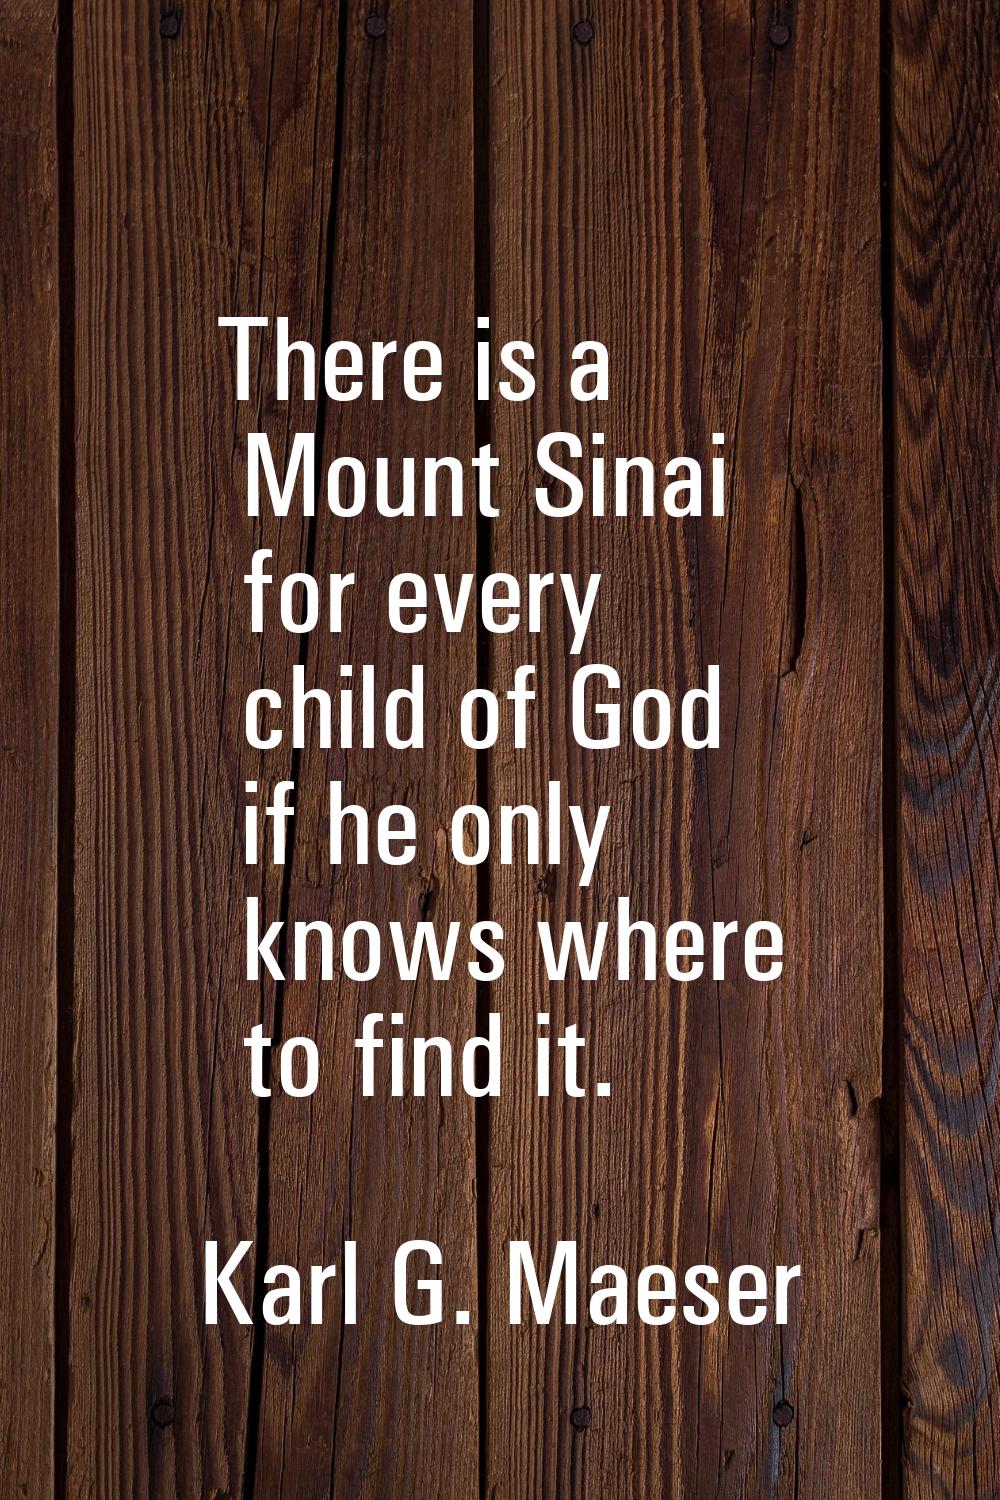 There is a Mount Sinai for every child of God if he only knows where to find it.